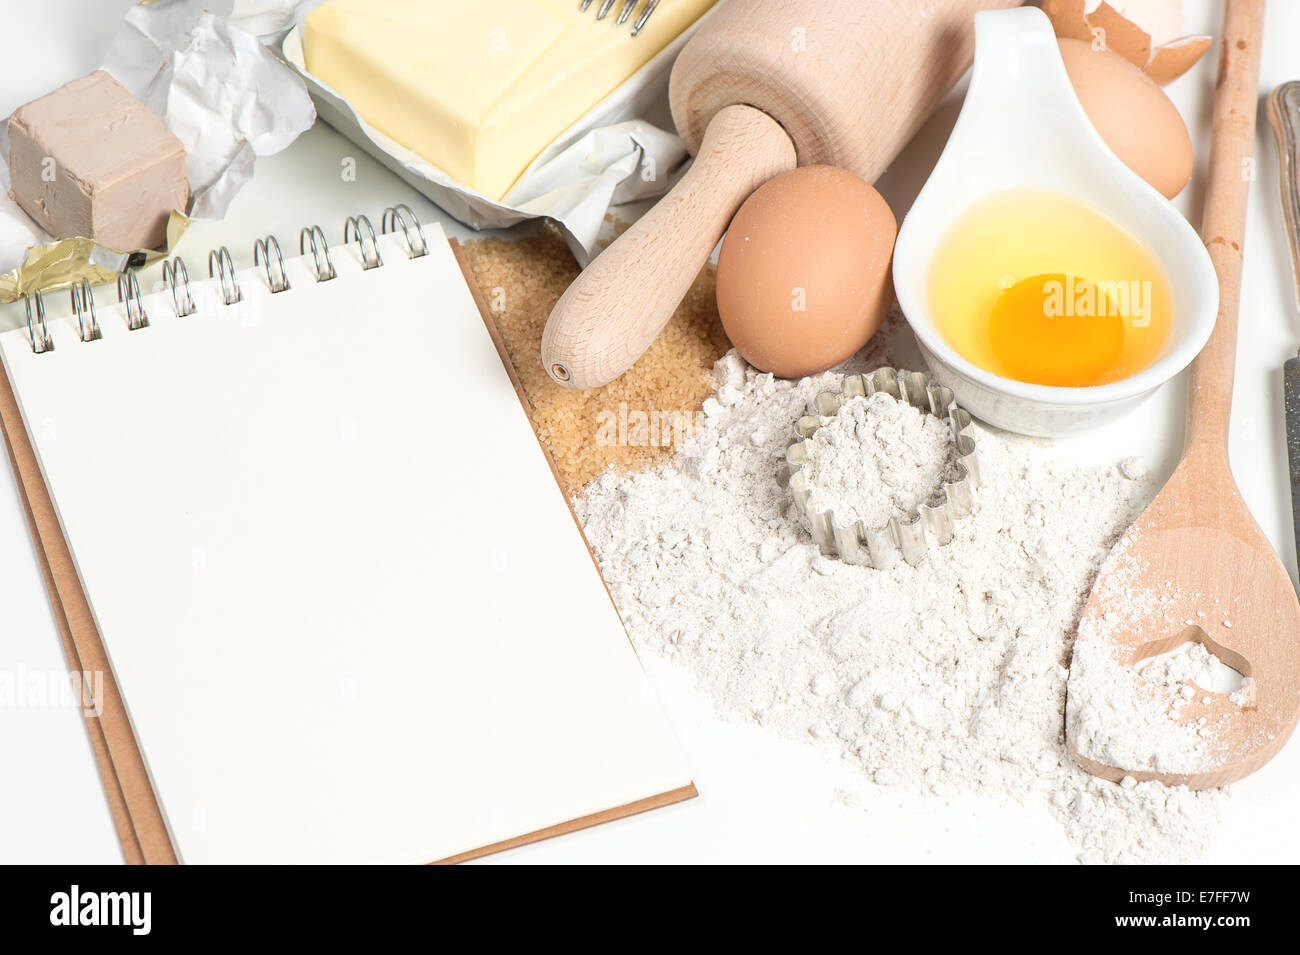 recipe book and baking ingredients eggs, flour, sugar, butter, yeast. food background Stock Photo